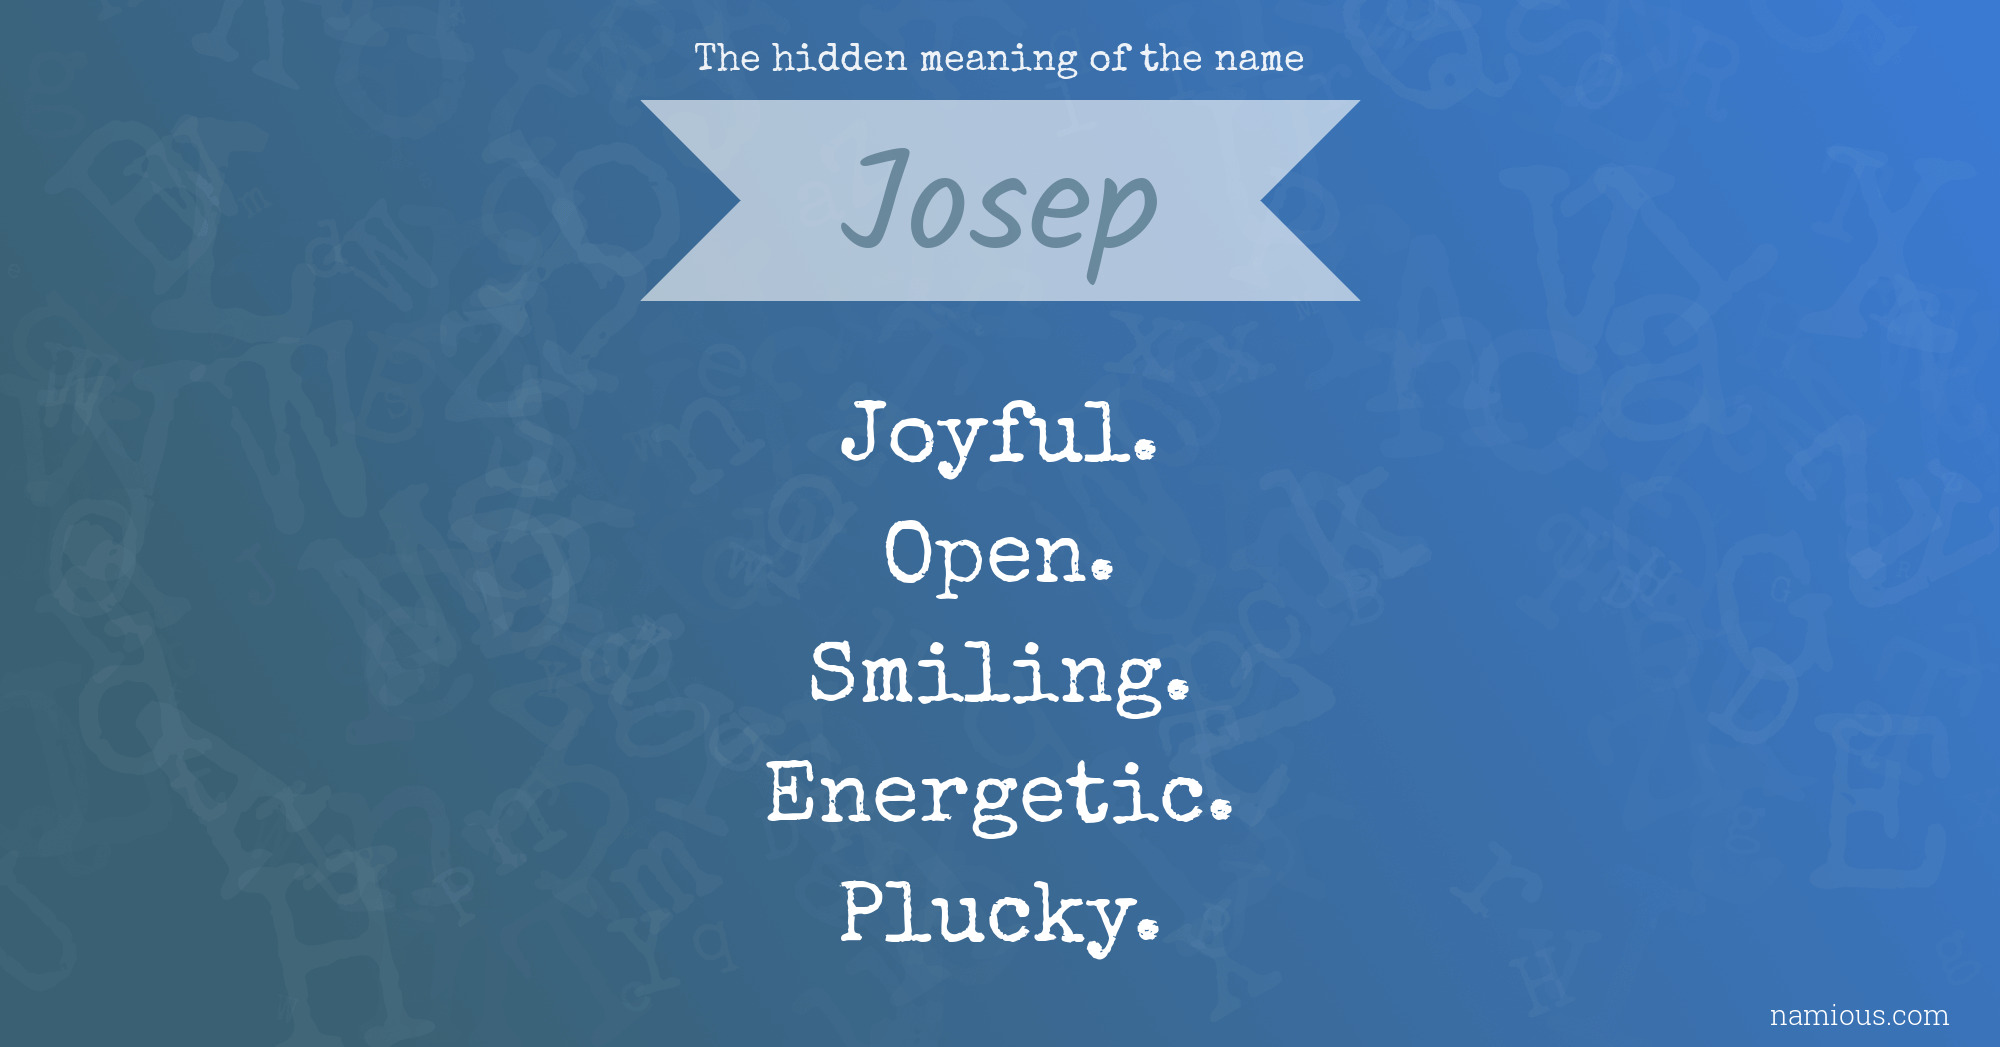 The hidden meaning of the name Josep